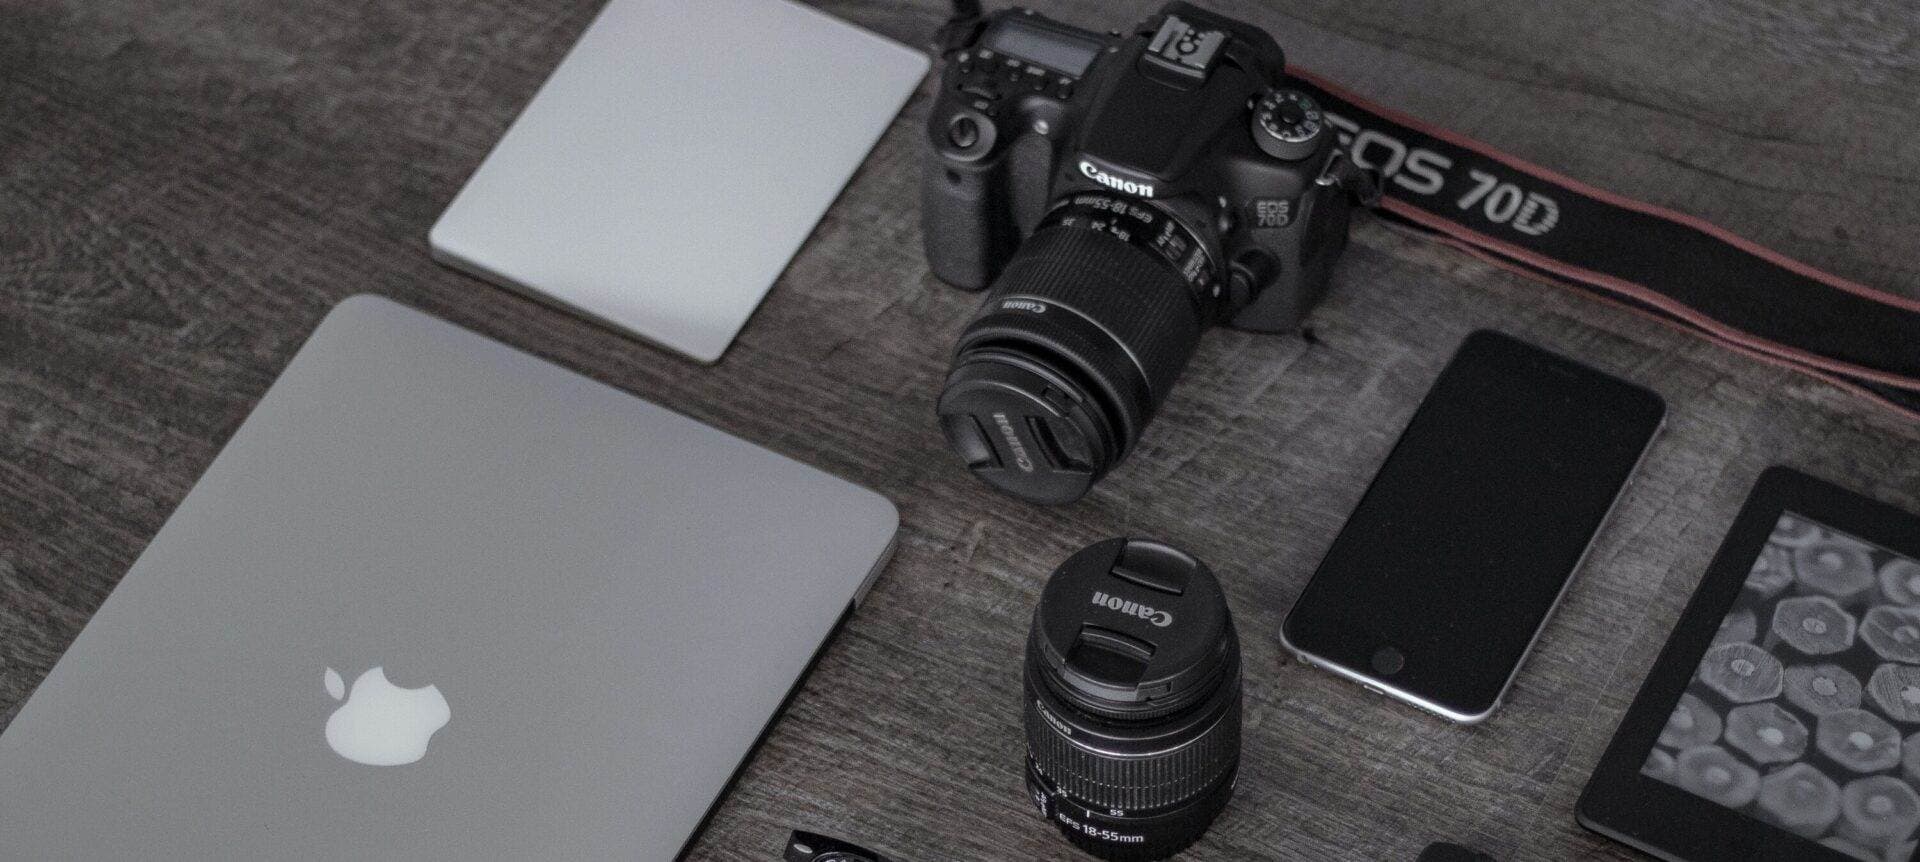 Can you compare a phone camera to a dslr, what would be the benefits of both?